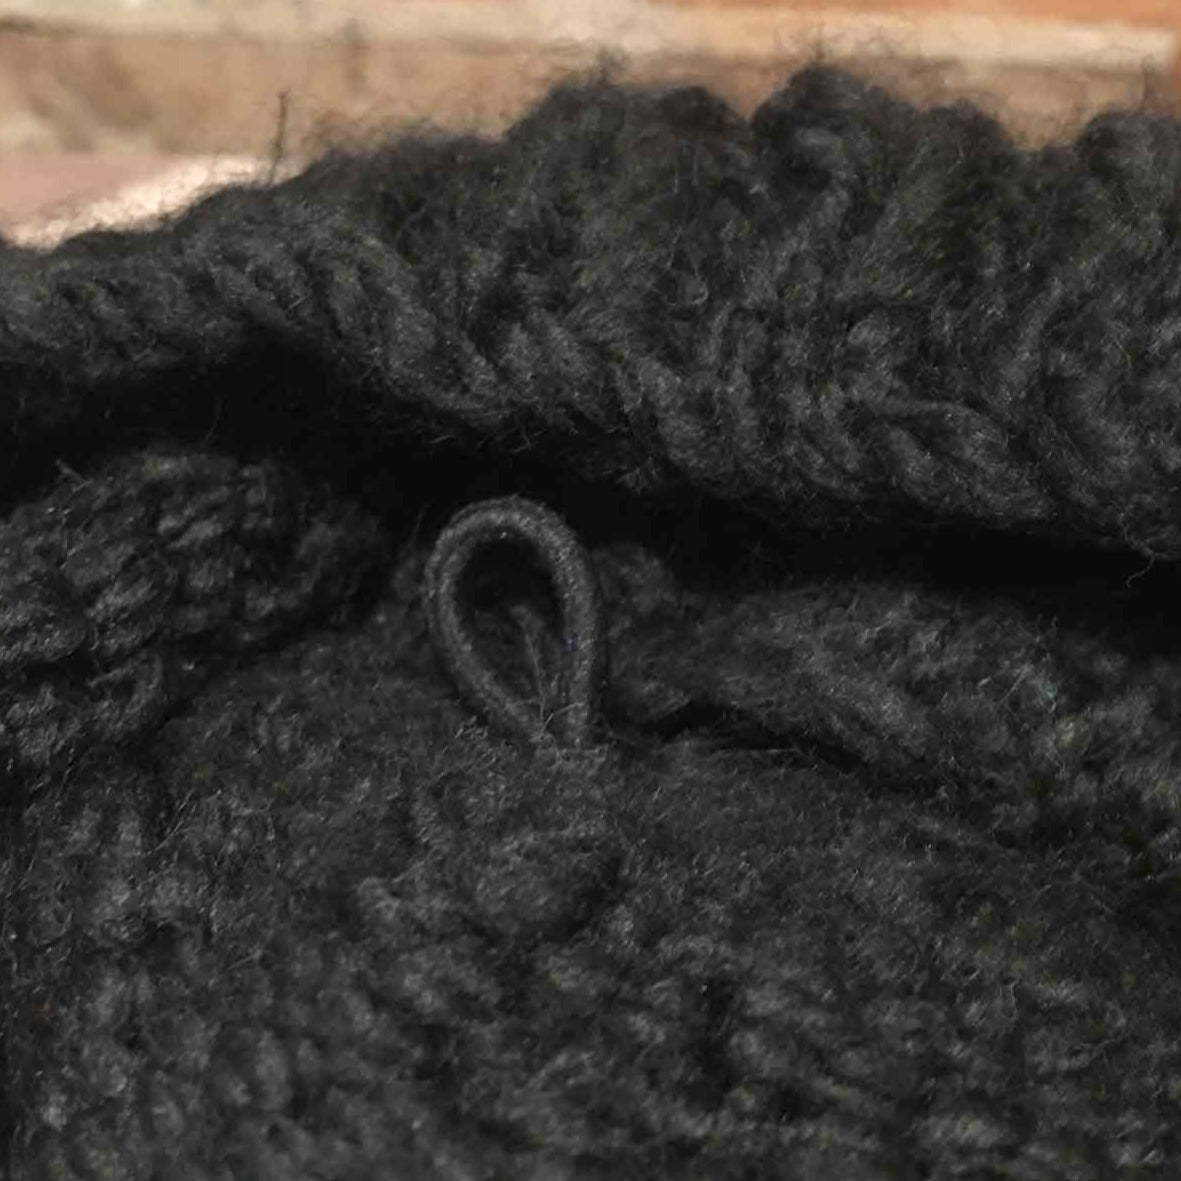 fabric covered loop attached on the insider of a knit hat